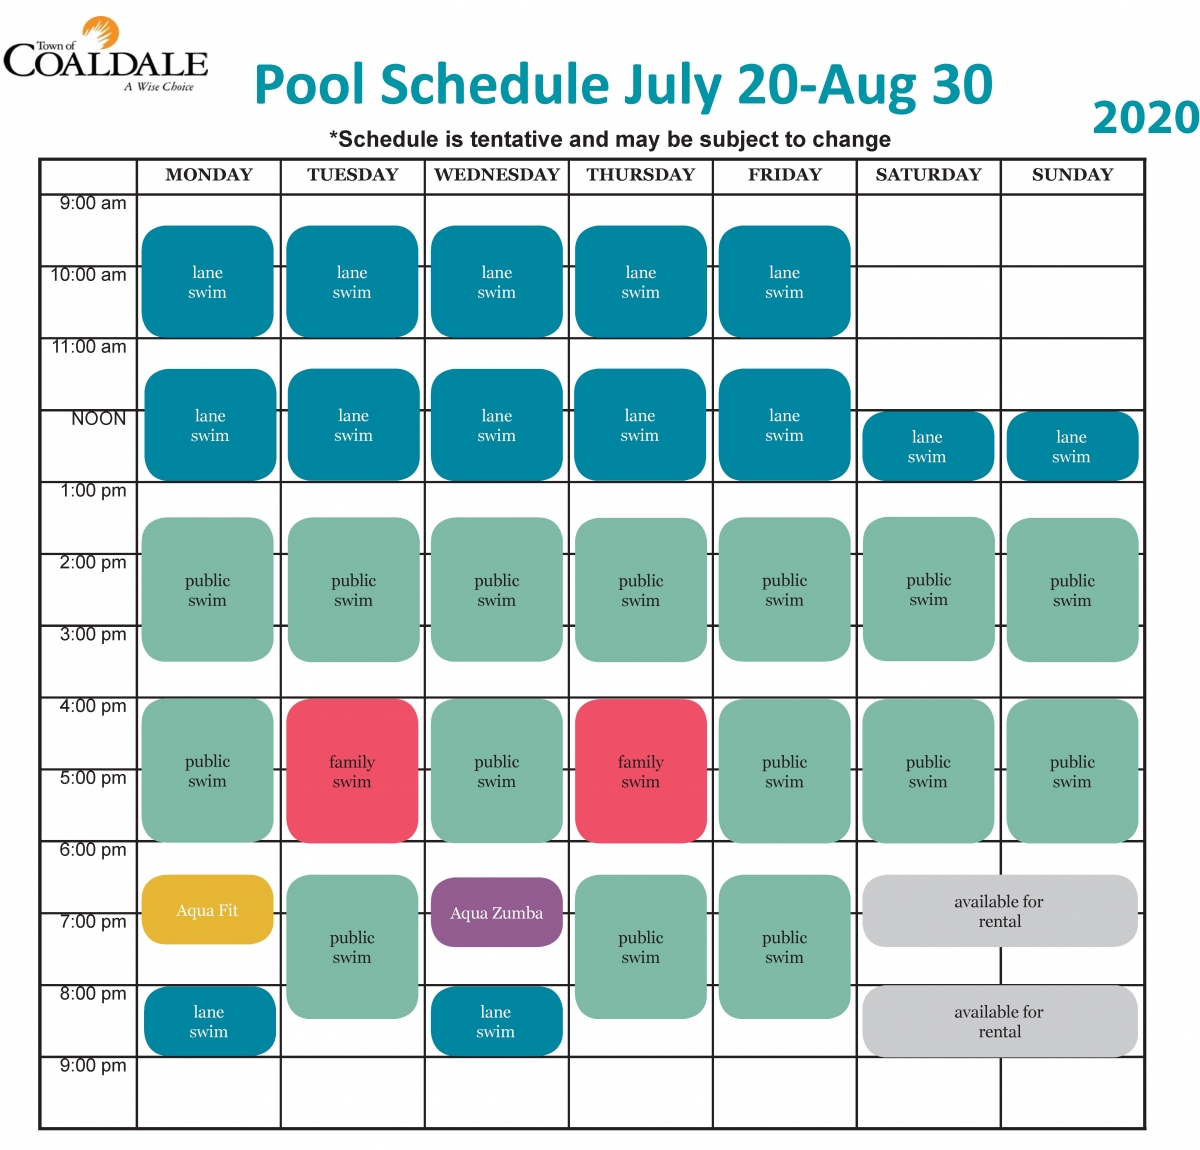 Updated pool schedule